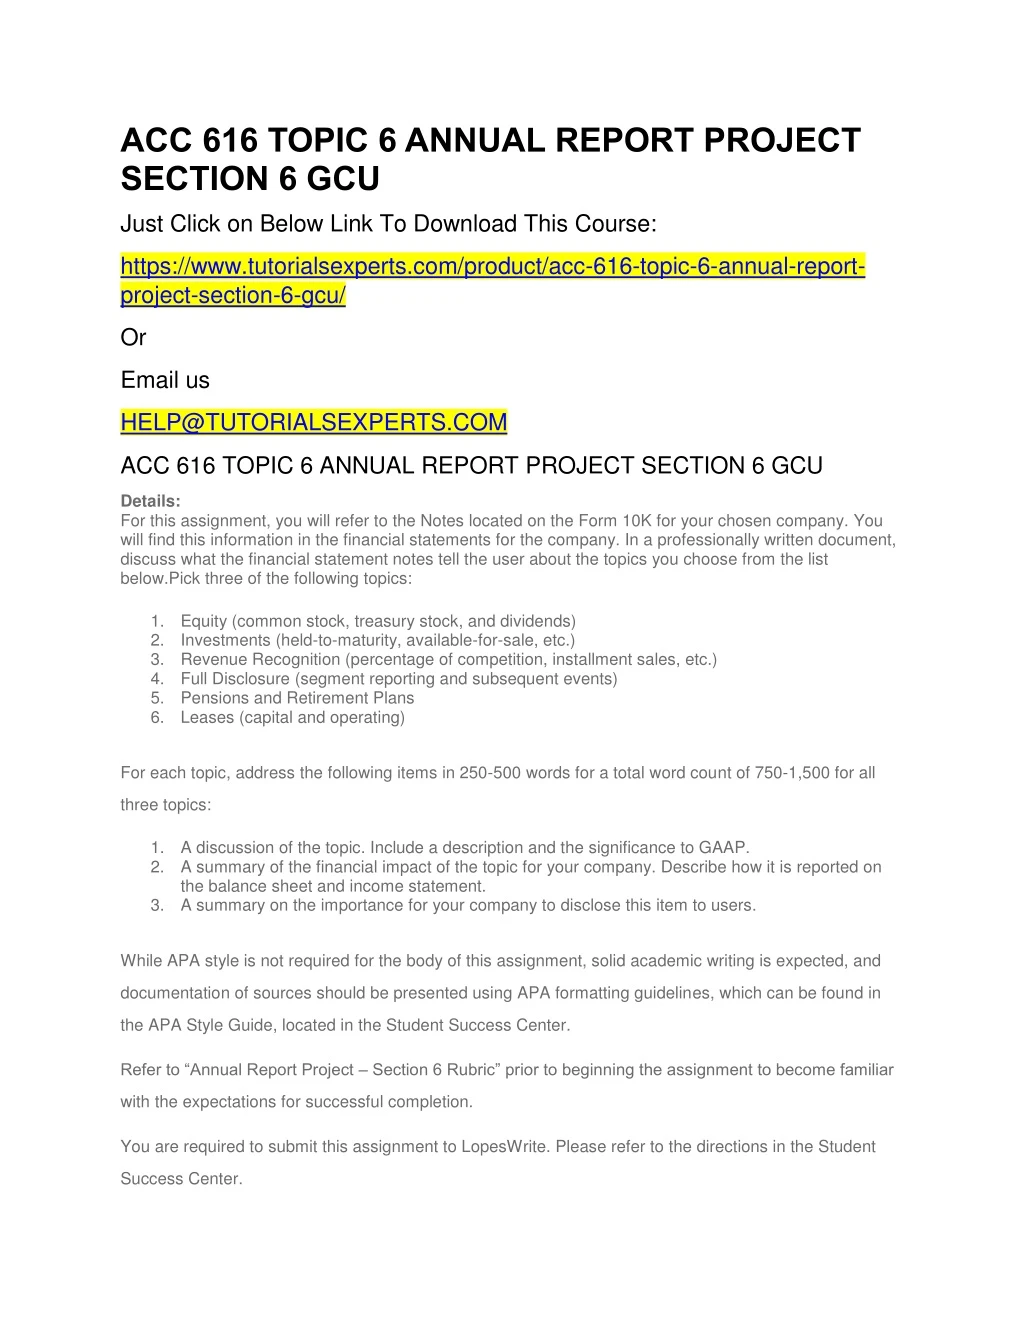 acc 616 topic 6 annual report project section